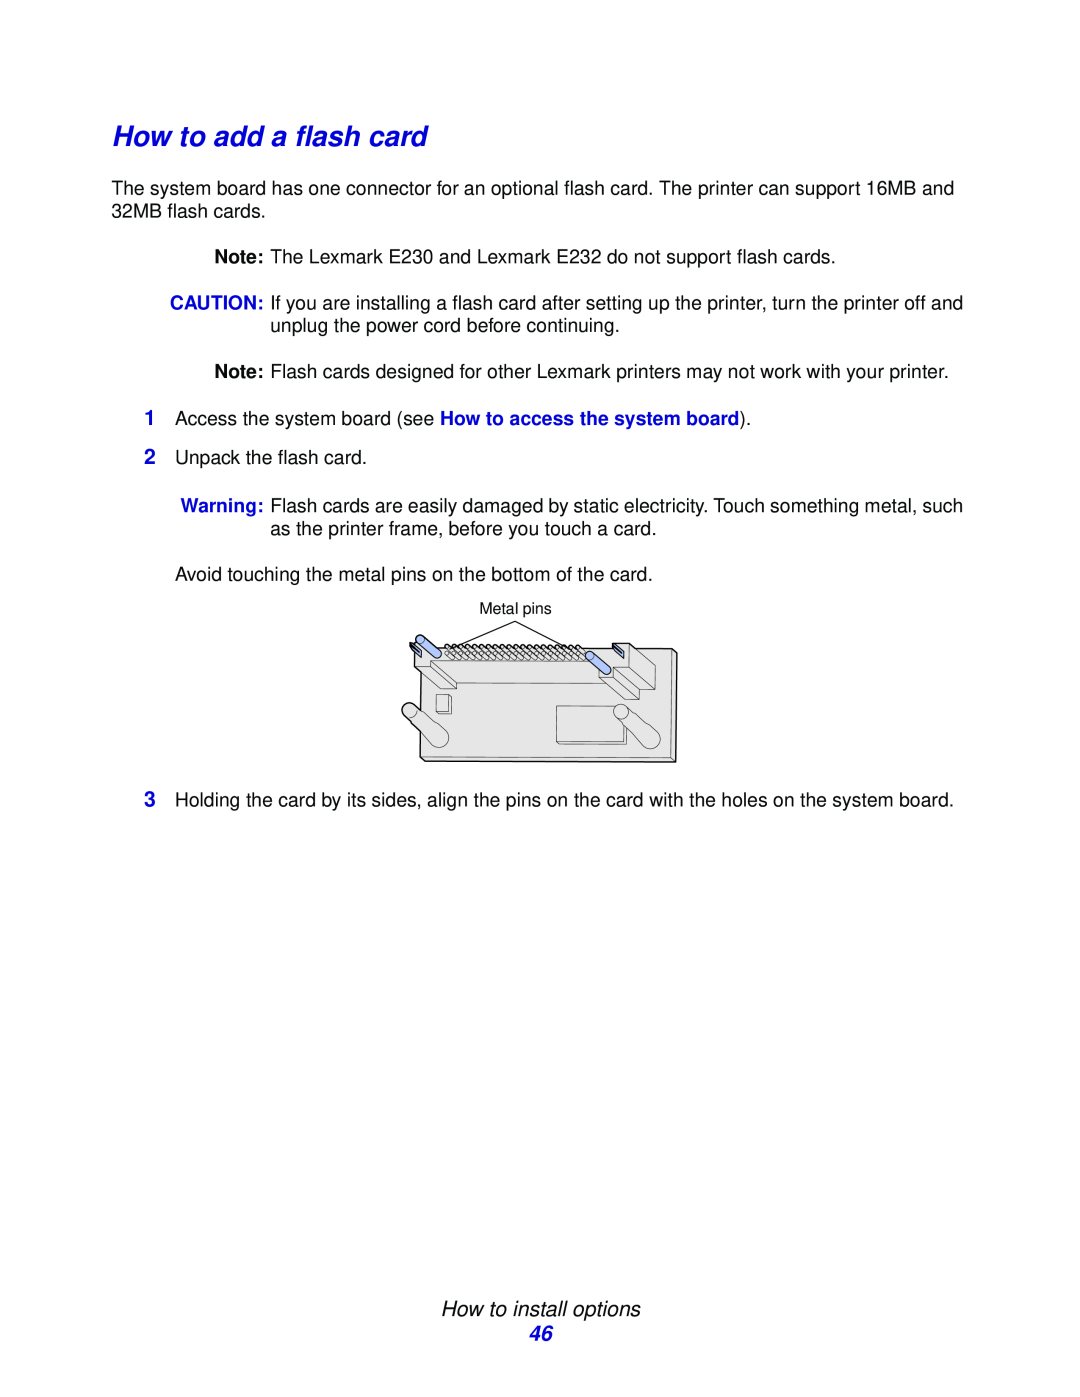 Lexmark E332n, 232, 230 manual How to add a flash card, How to install options, Metal pins 